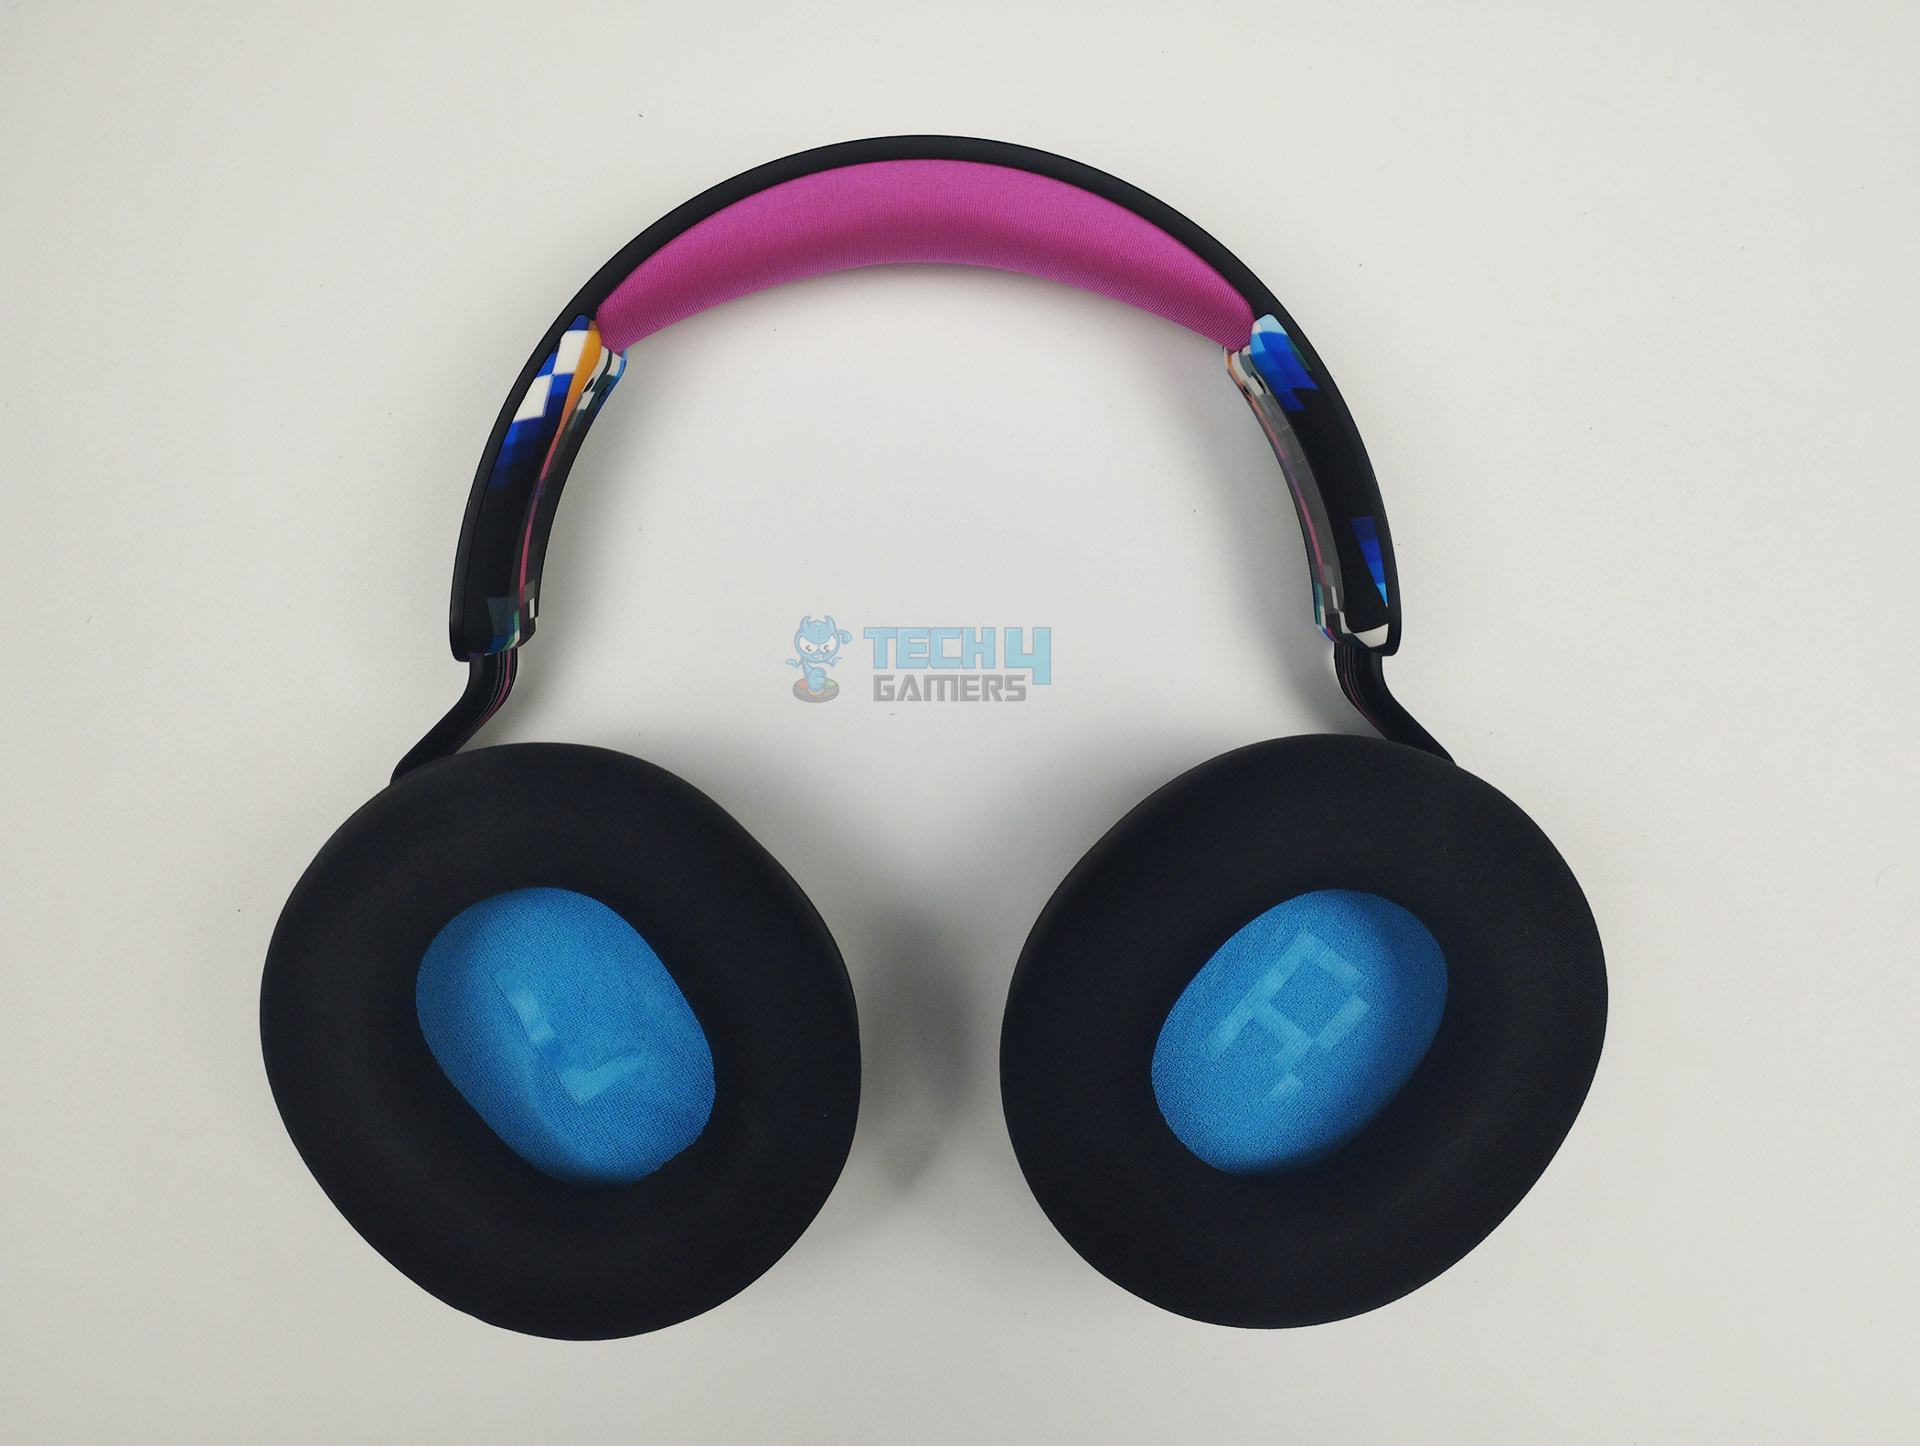 Earcups (Image By Tech4Gamers)